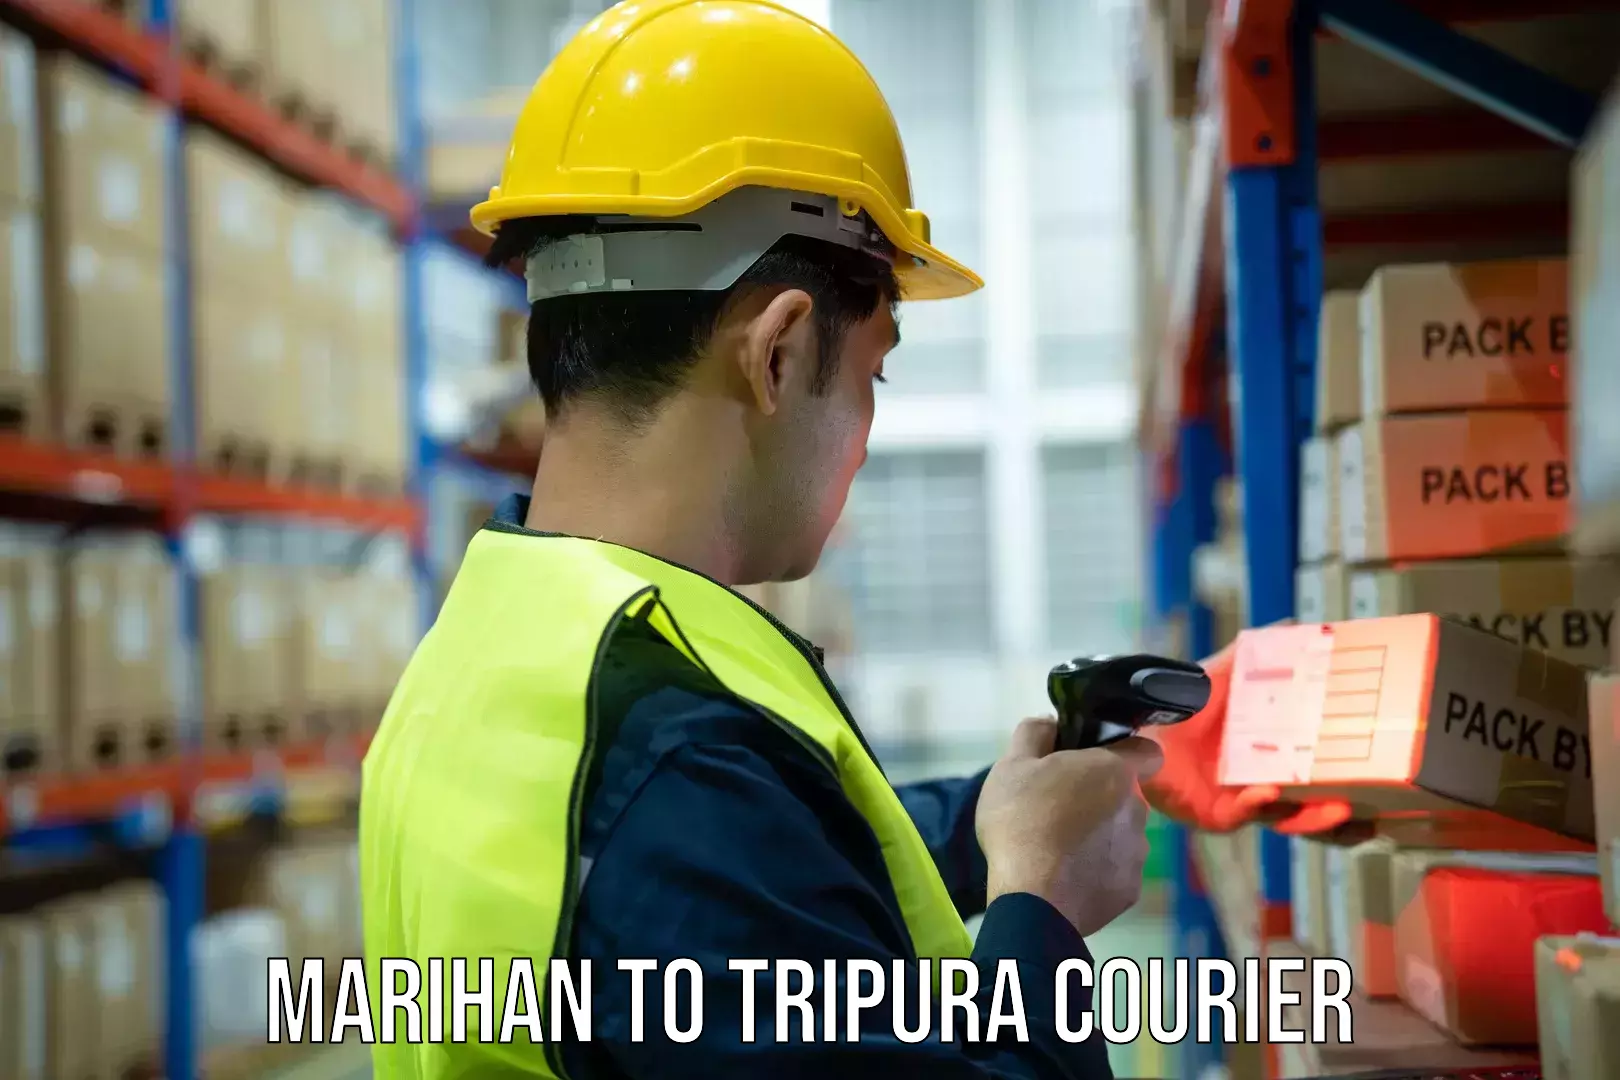 Nationwide courier service Marihan to North Tripura